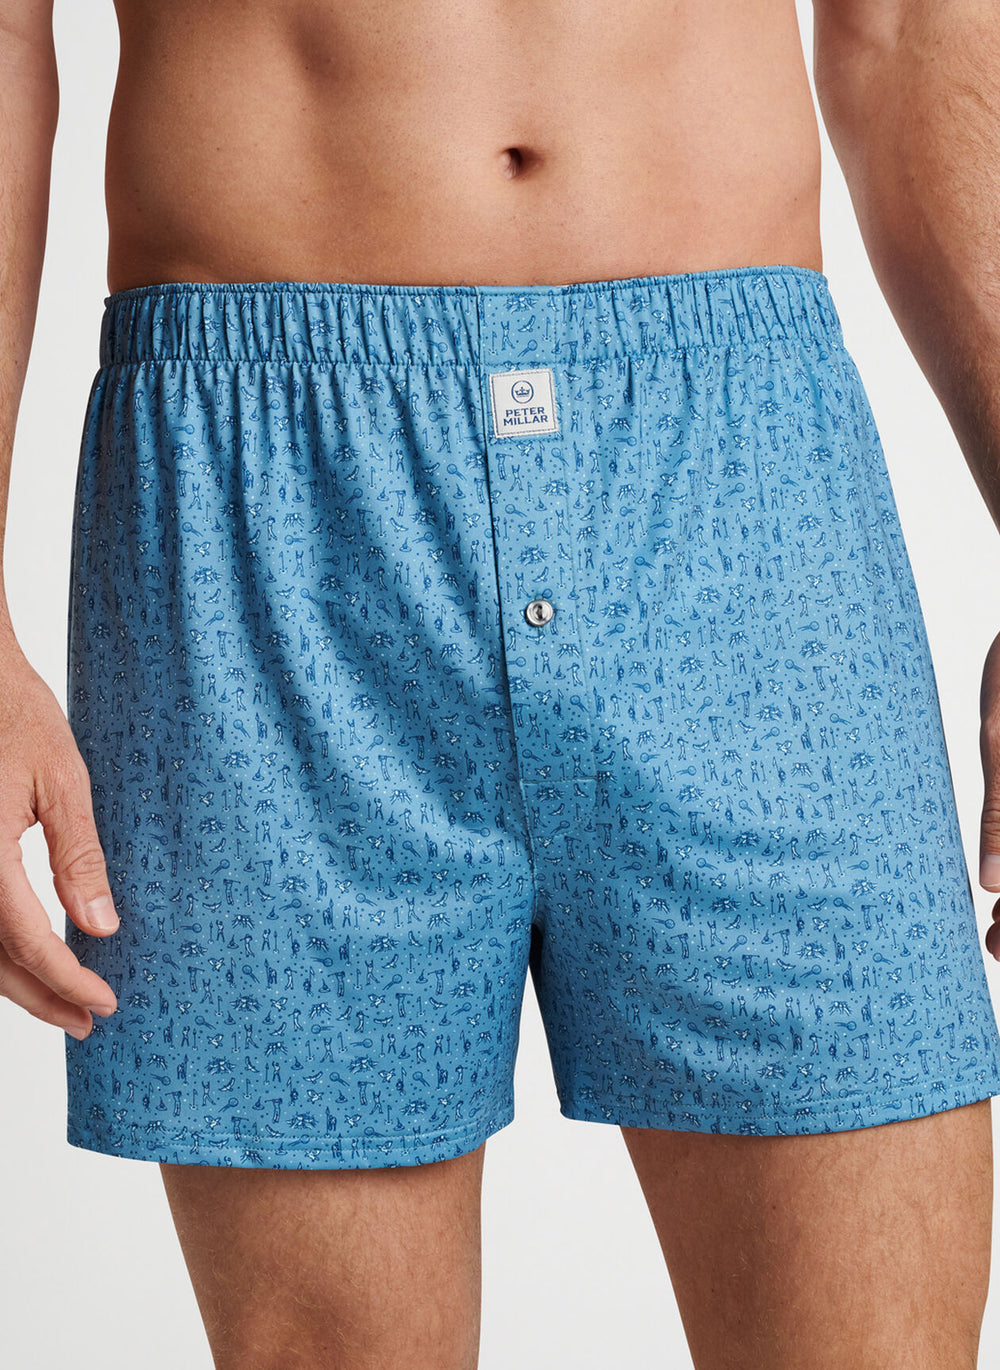 Peter Millar Hole In One Performance Boxer Short